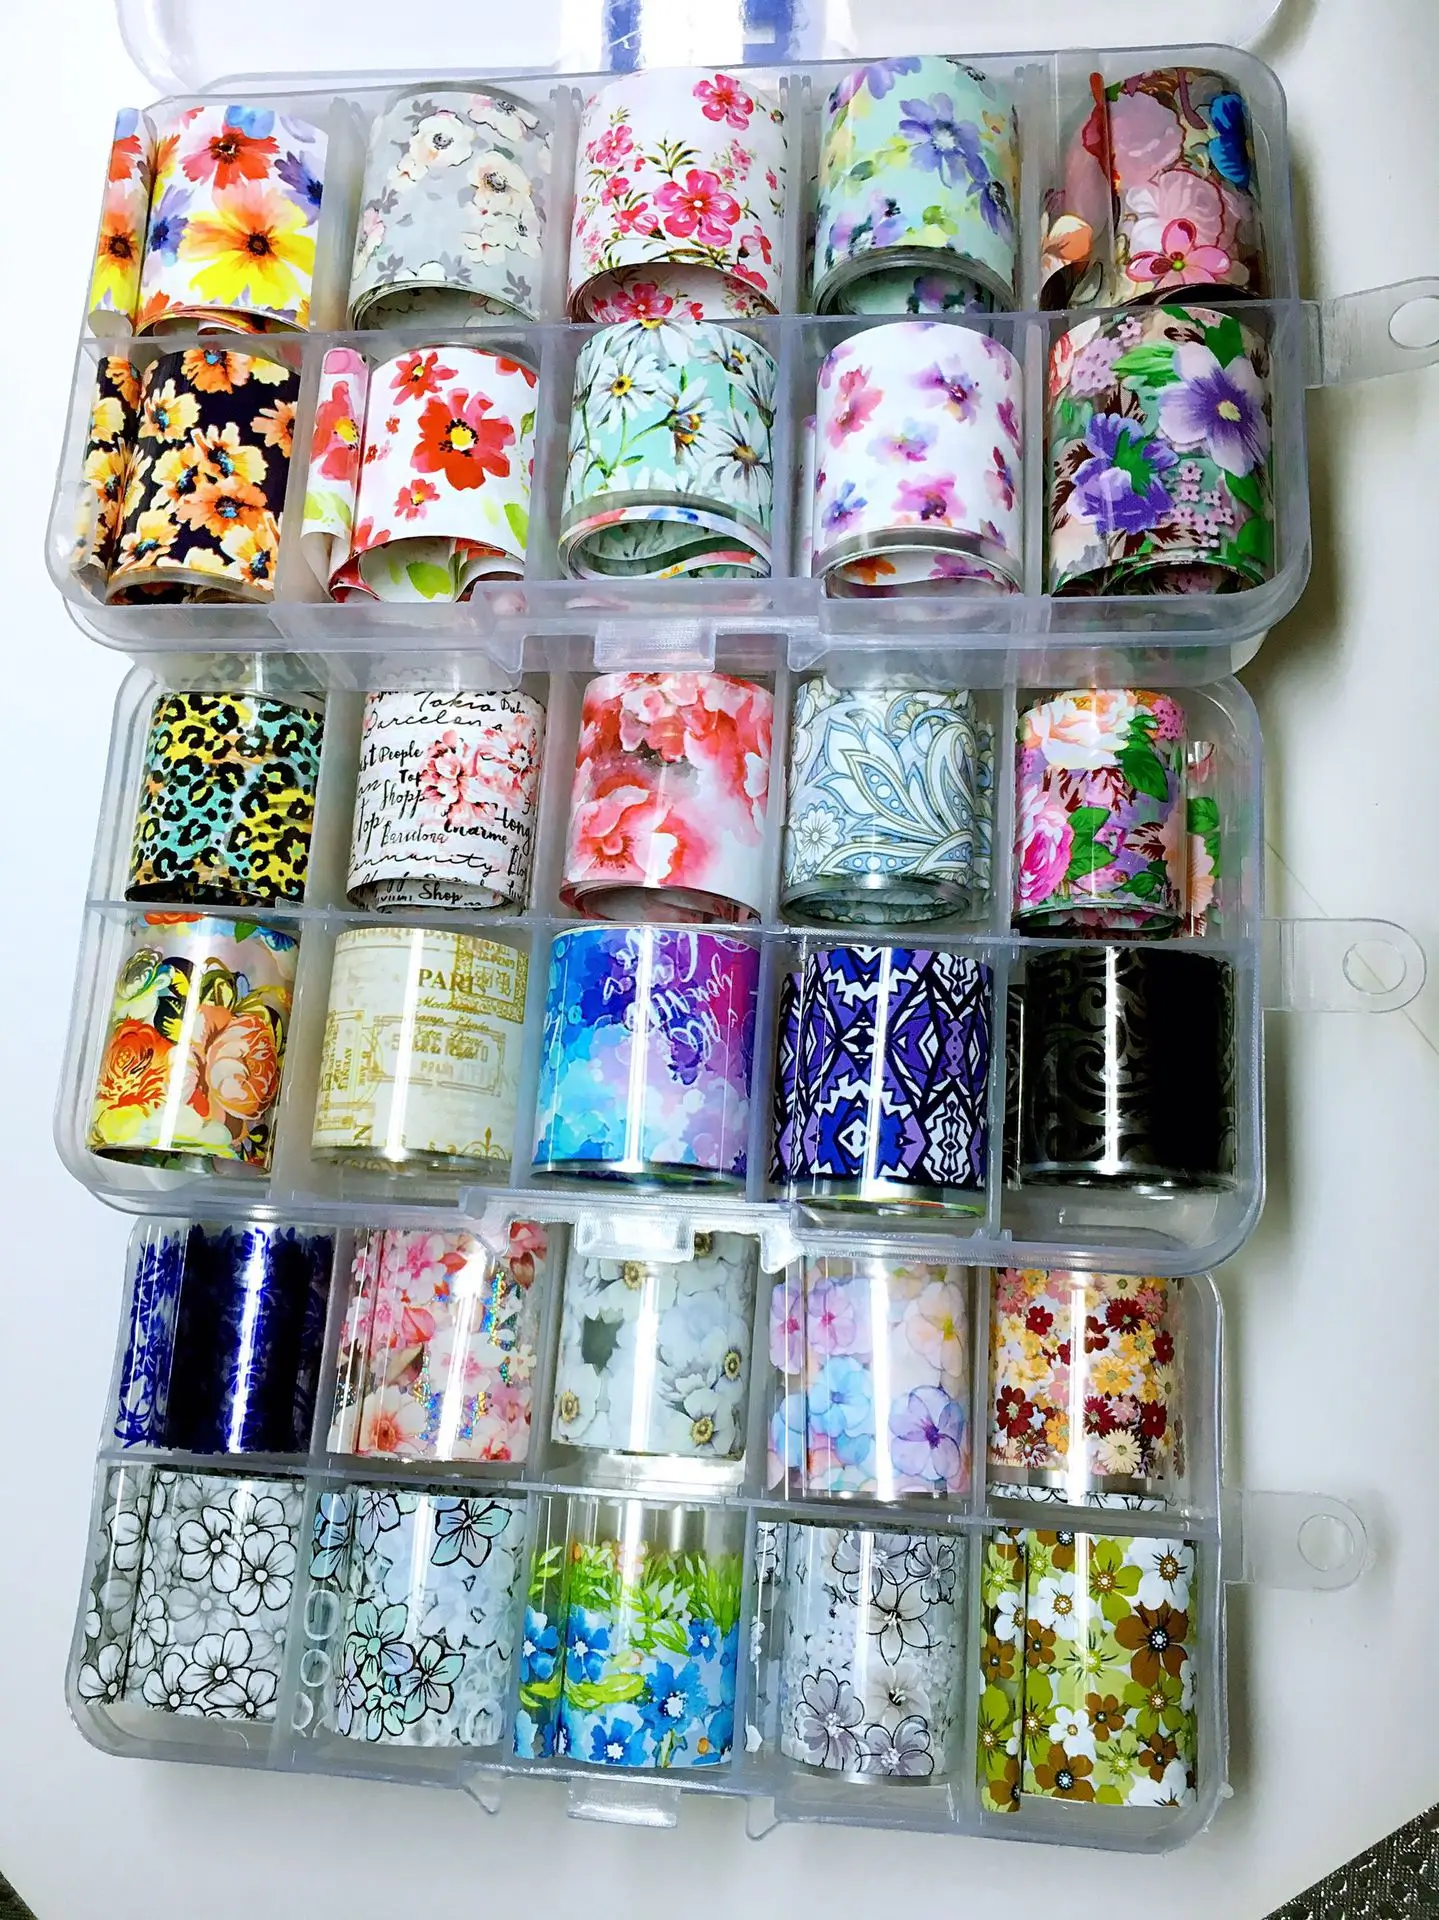 

2.5X100cm Holographic Nail Art Transfer Foil Sticker Starry AB Paper Wraps Adhesive Decals Nails Decoration Accessories